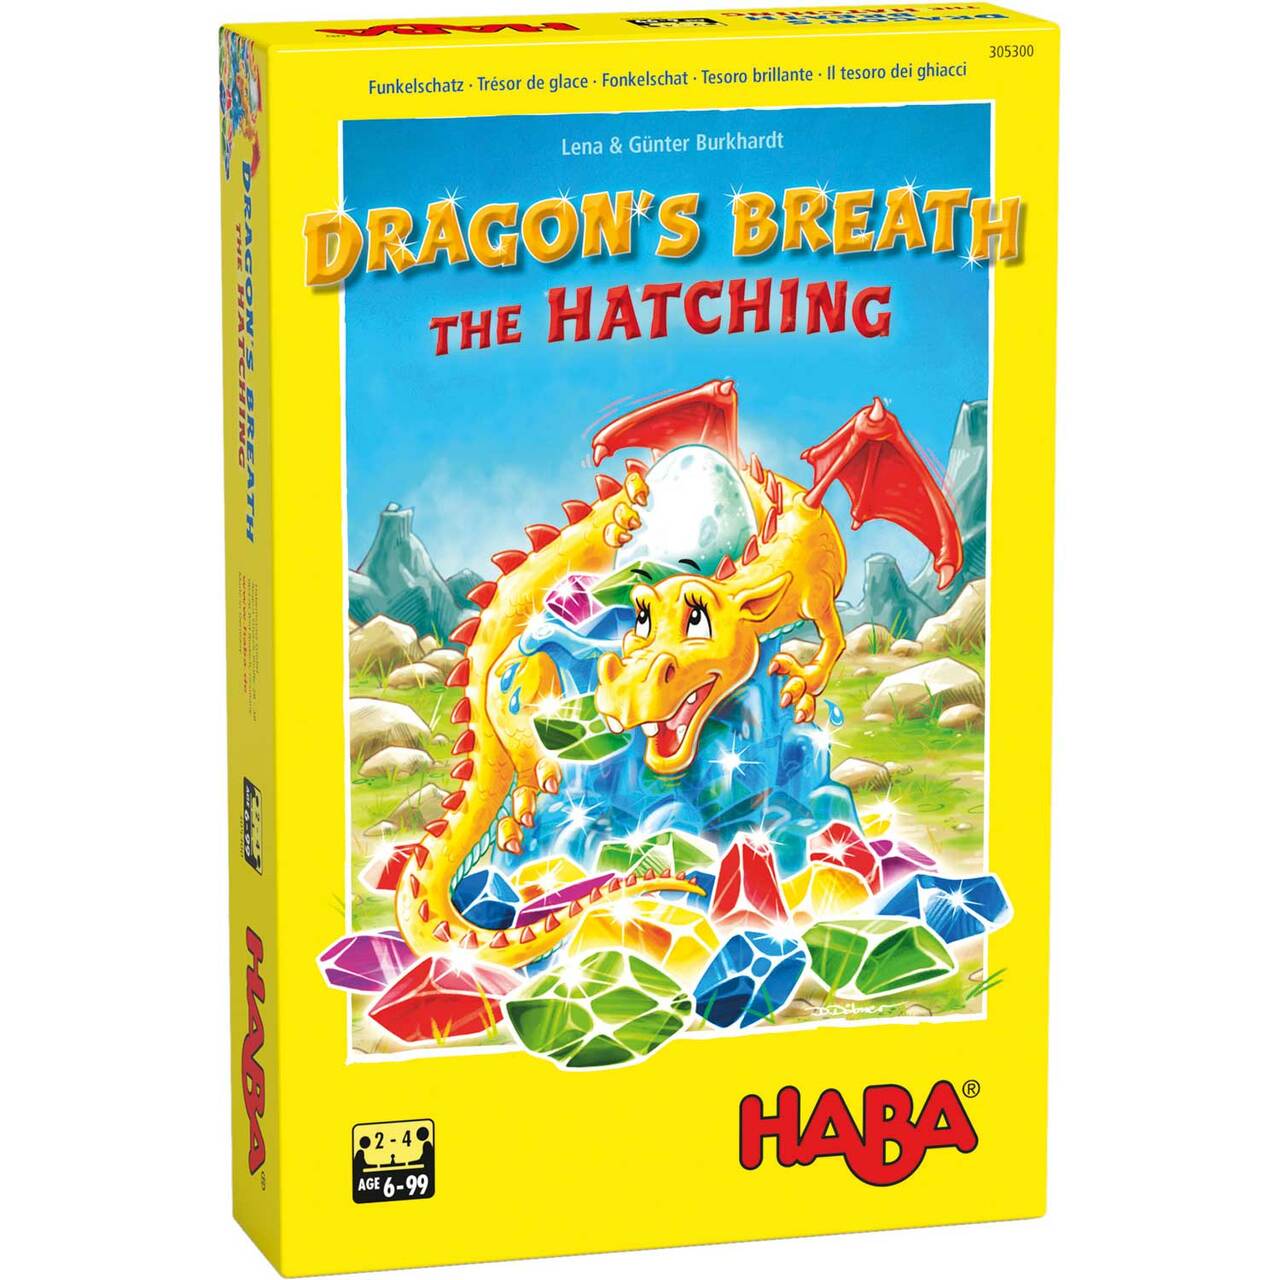 DRAGON'S BREATH THE HATCHING